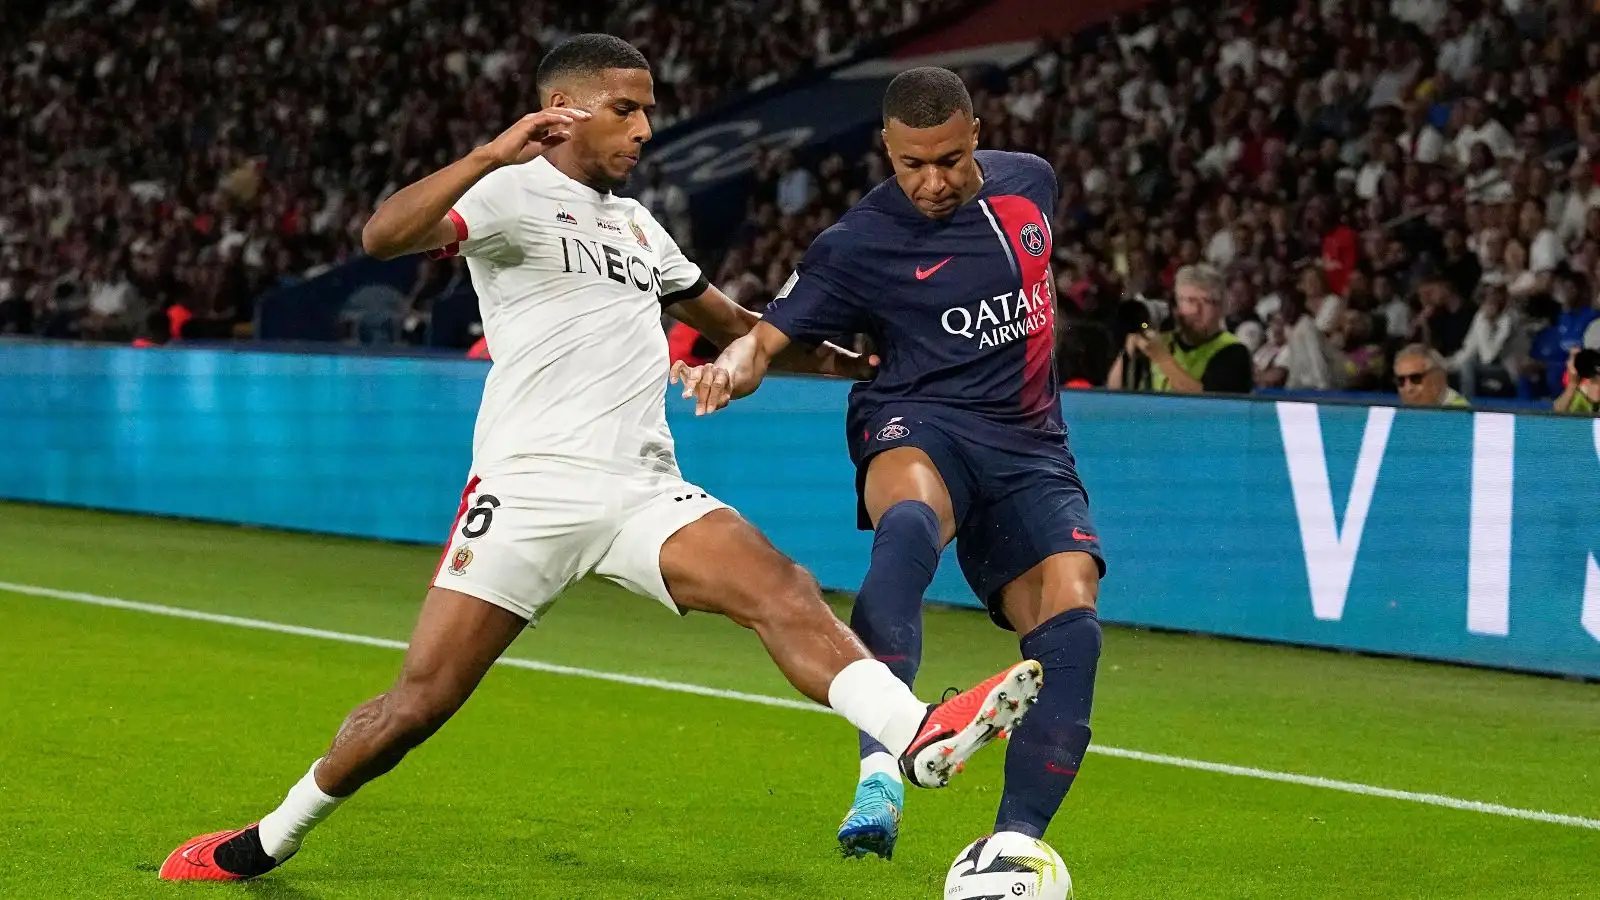 Jean-Clair Todibo battles with Kylian Mbappe